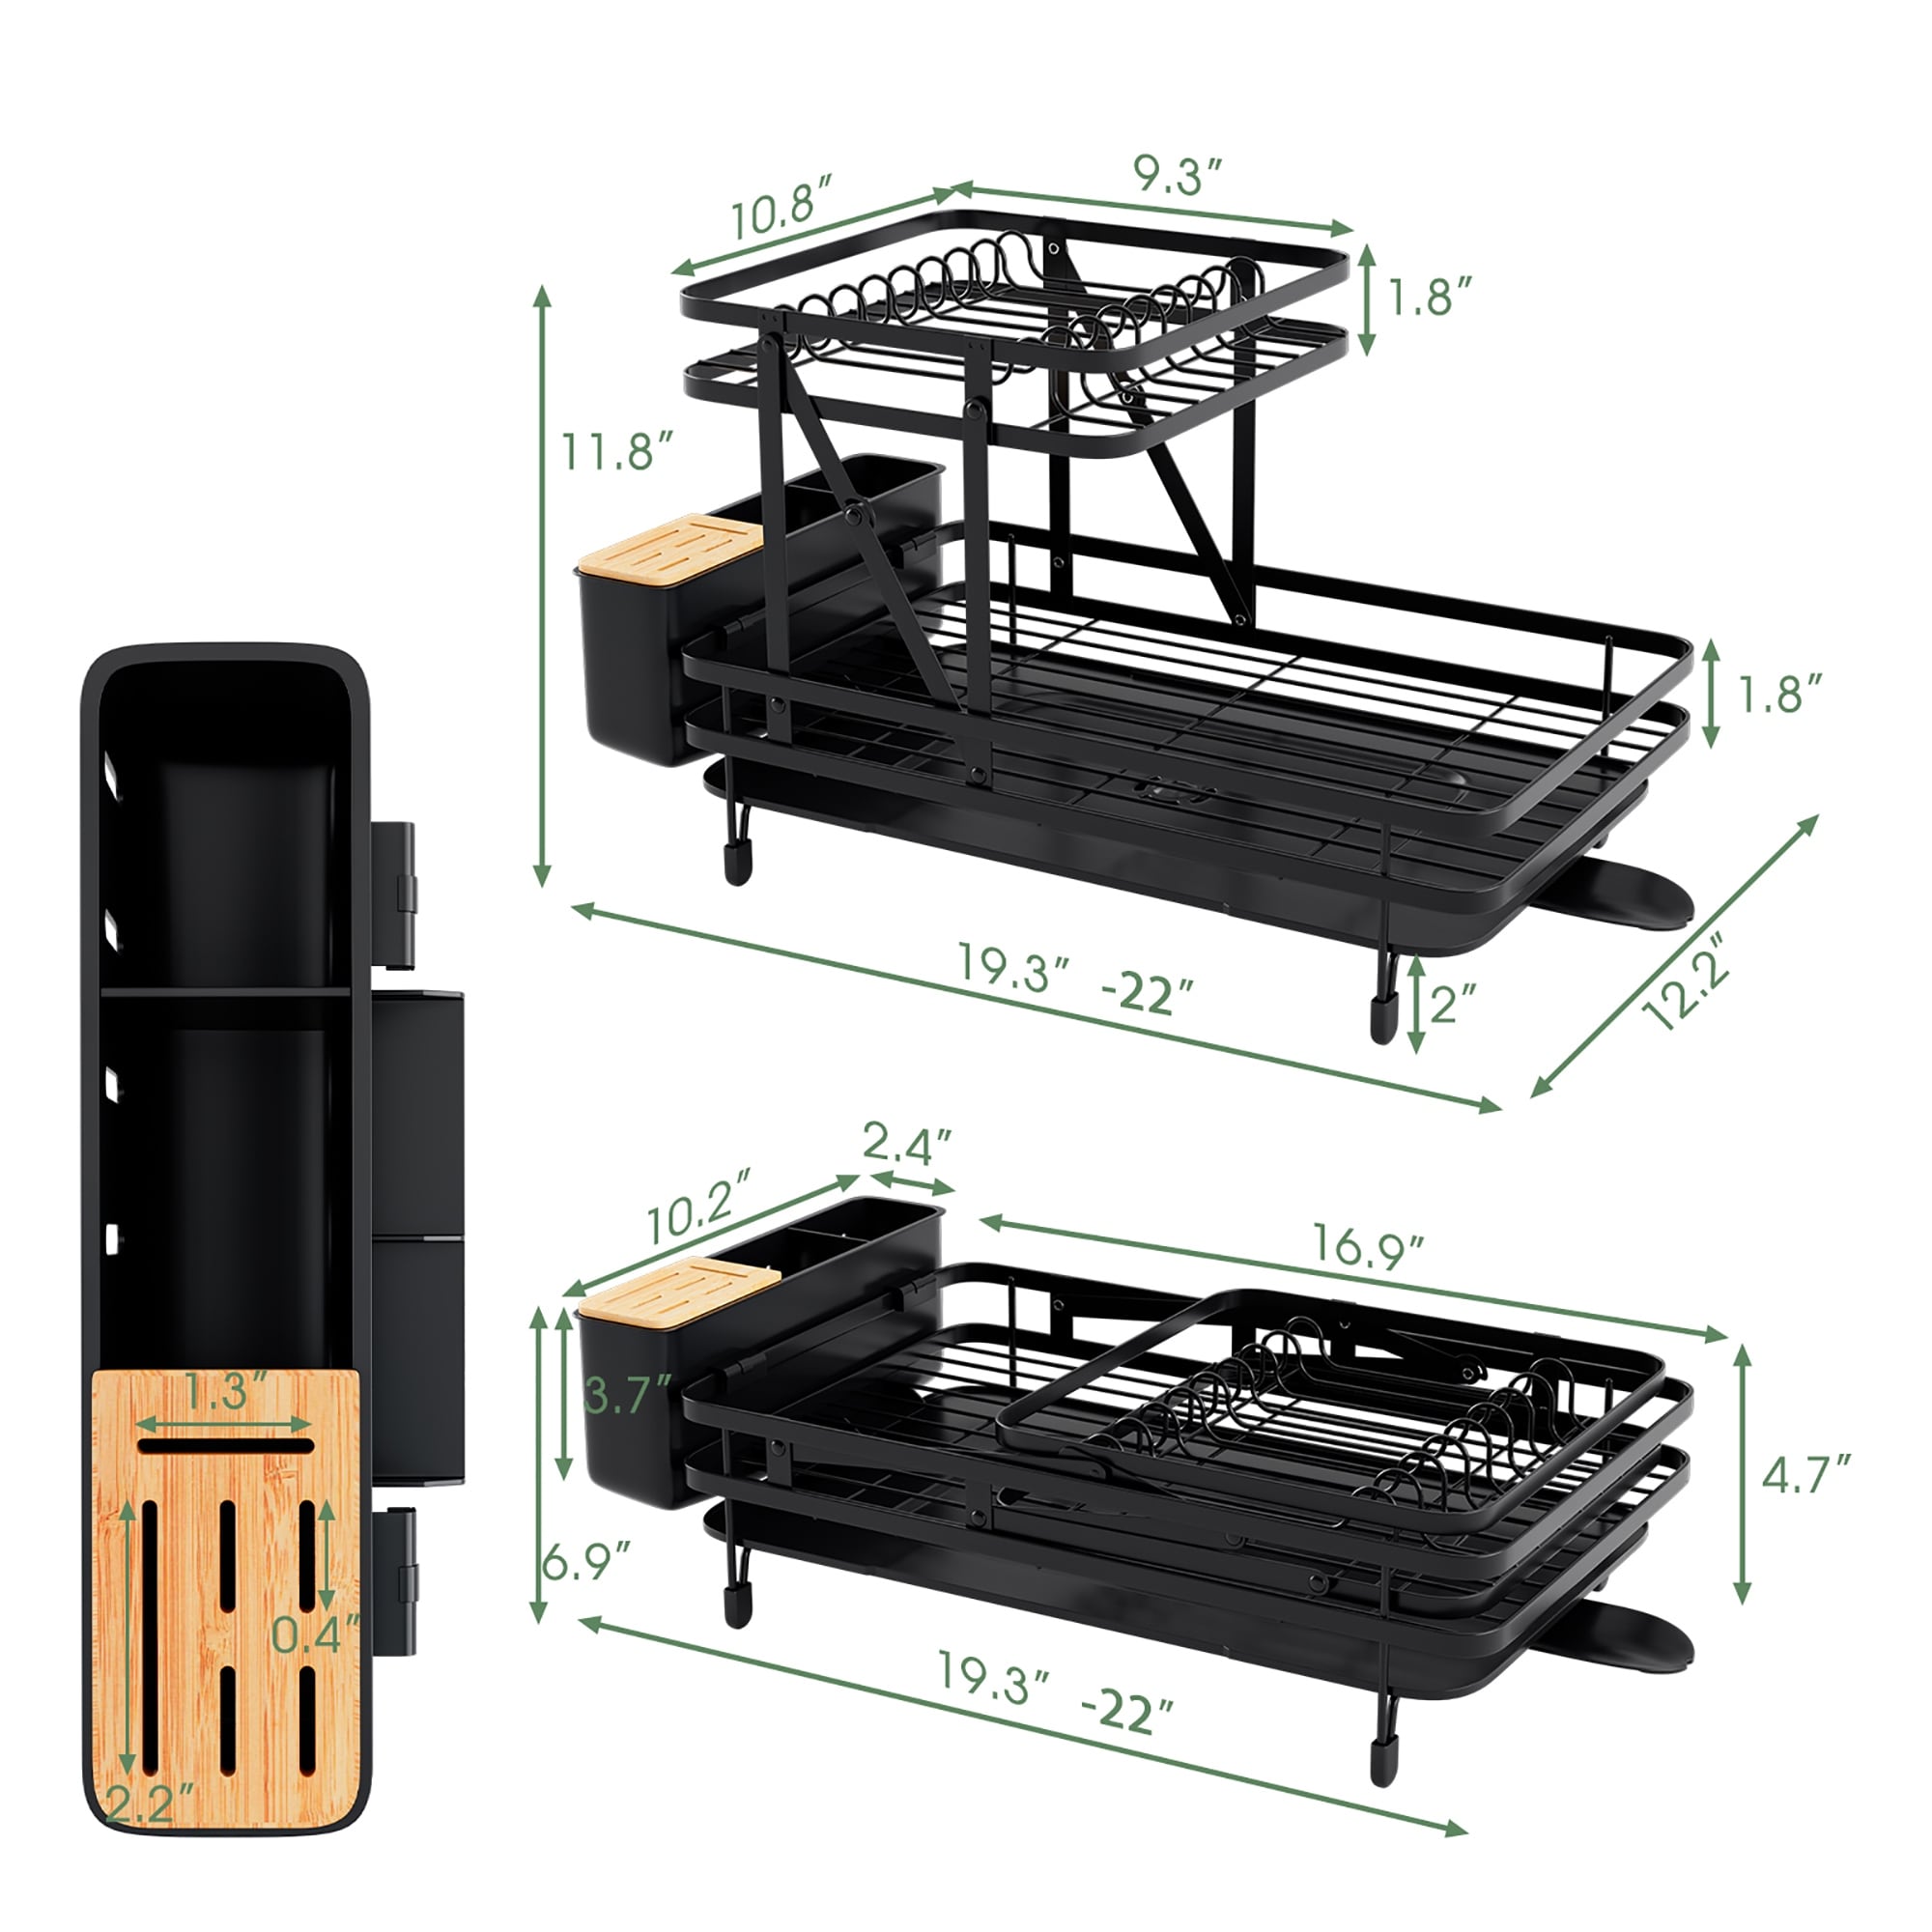 https://ak1.ostkcdn.com/images/products/is/images/direct/14756983451280d5c7ce65c8a5d464d023294105/Costway-Dish-Drying-Rack-Collapsible-2-Tier-Dish-Rack-and-Drainboard.jpg